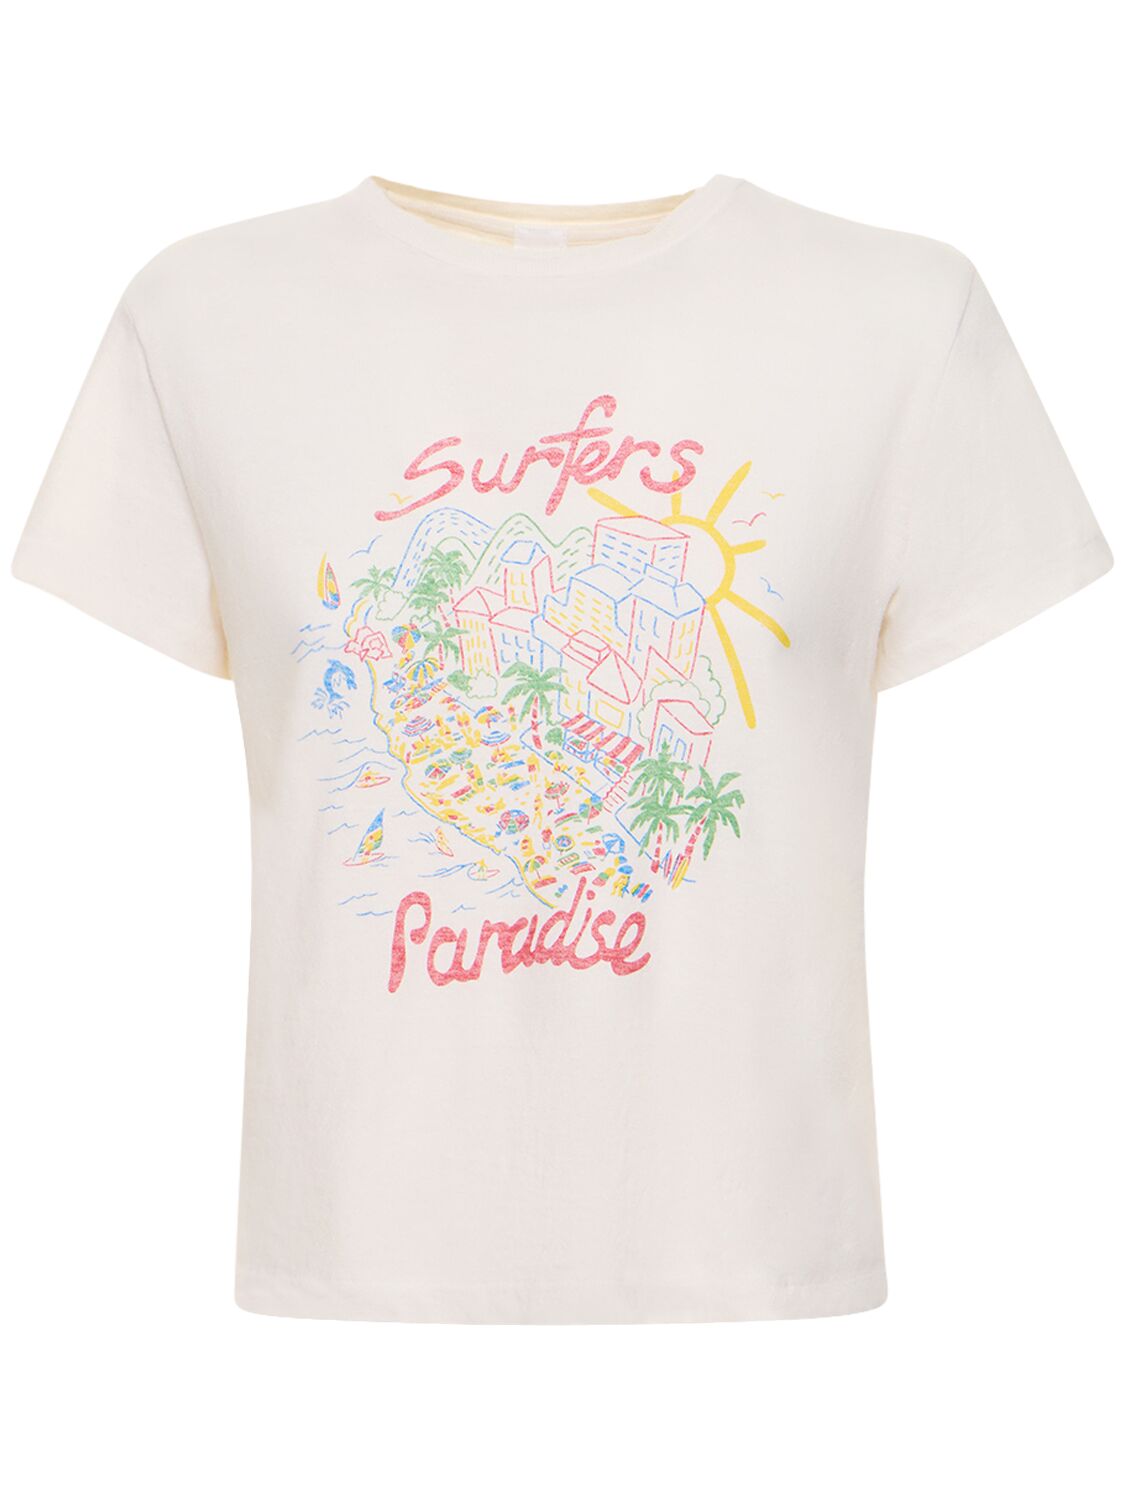 Re/done Surfers Paradise Classic Cotton T-shirt In White,multi